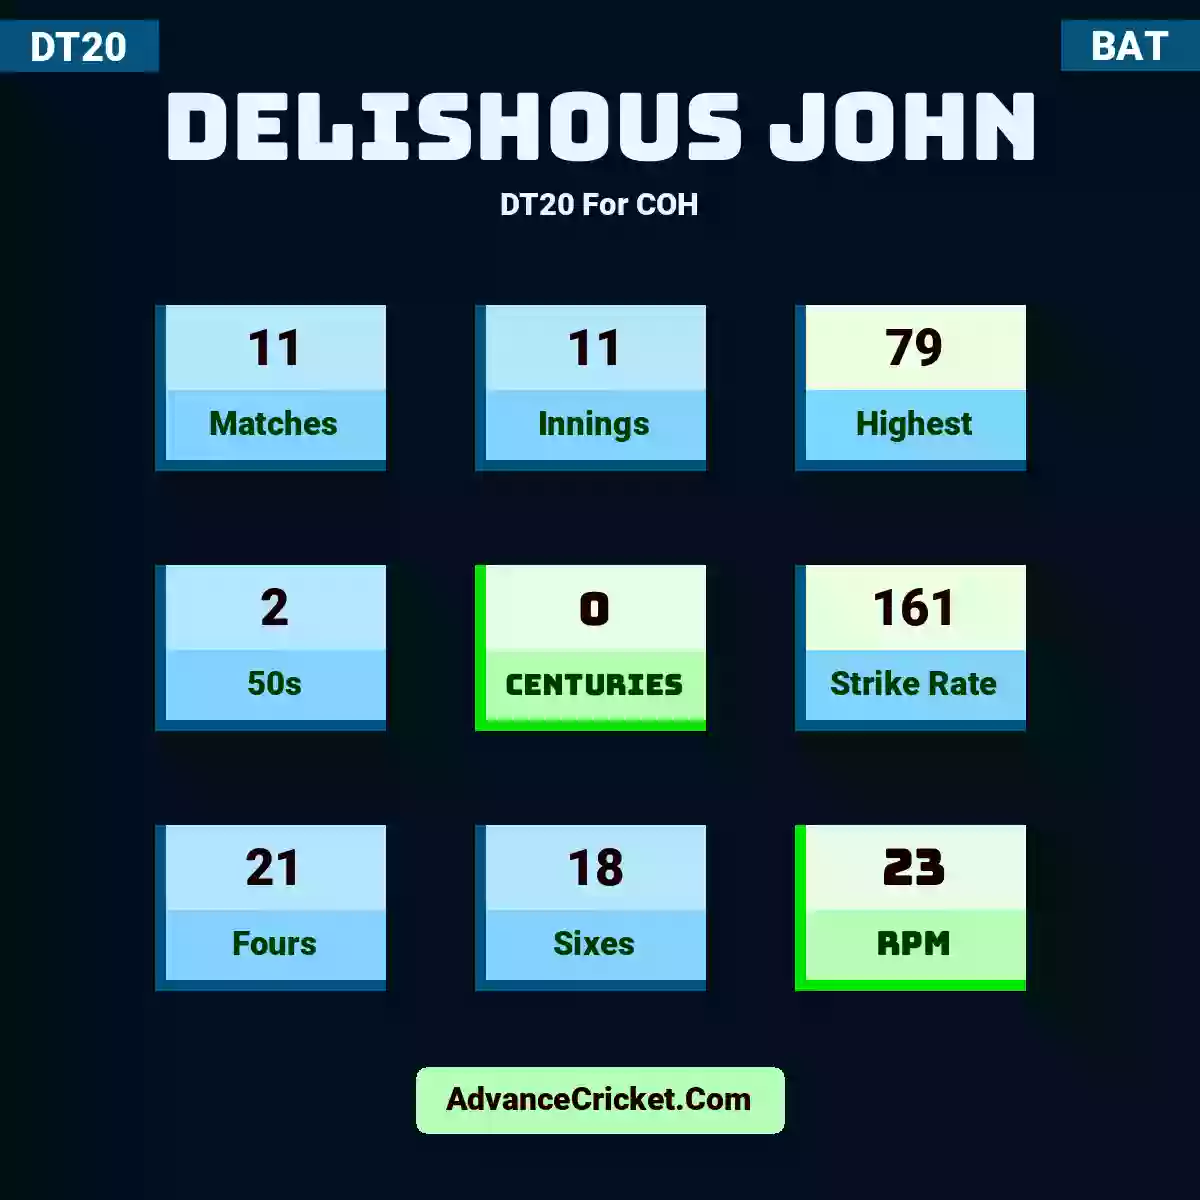 Delishous John DT20  For COH, Delishous John played 11 matches, scored 79 runs as highest, 2 half-centuries, and 0 centuries, with a strike rate of 161. D.John hit 21 fours and 18 sixes, with an RPM of 23.